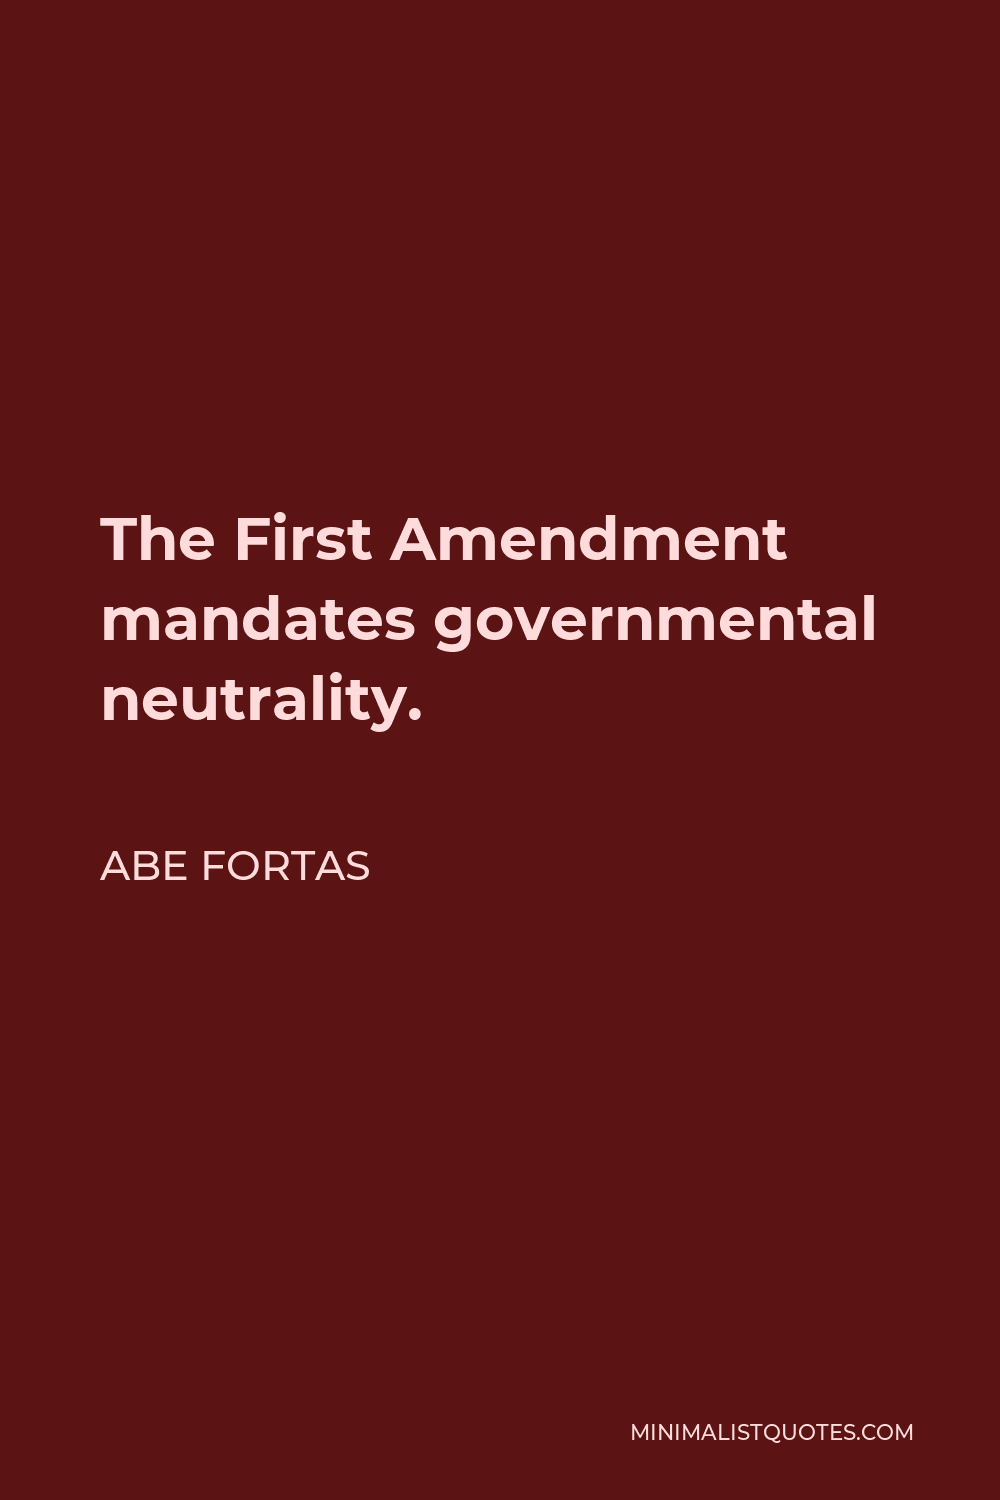 Abe Fortas Quote - The First Amendment mandates governmental neutrality.